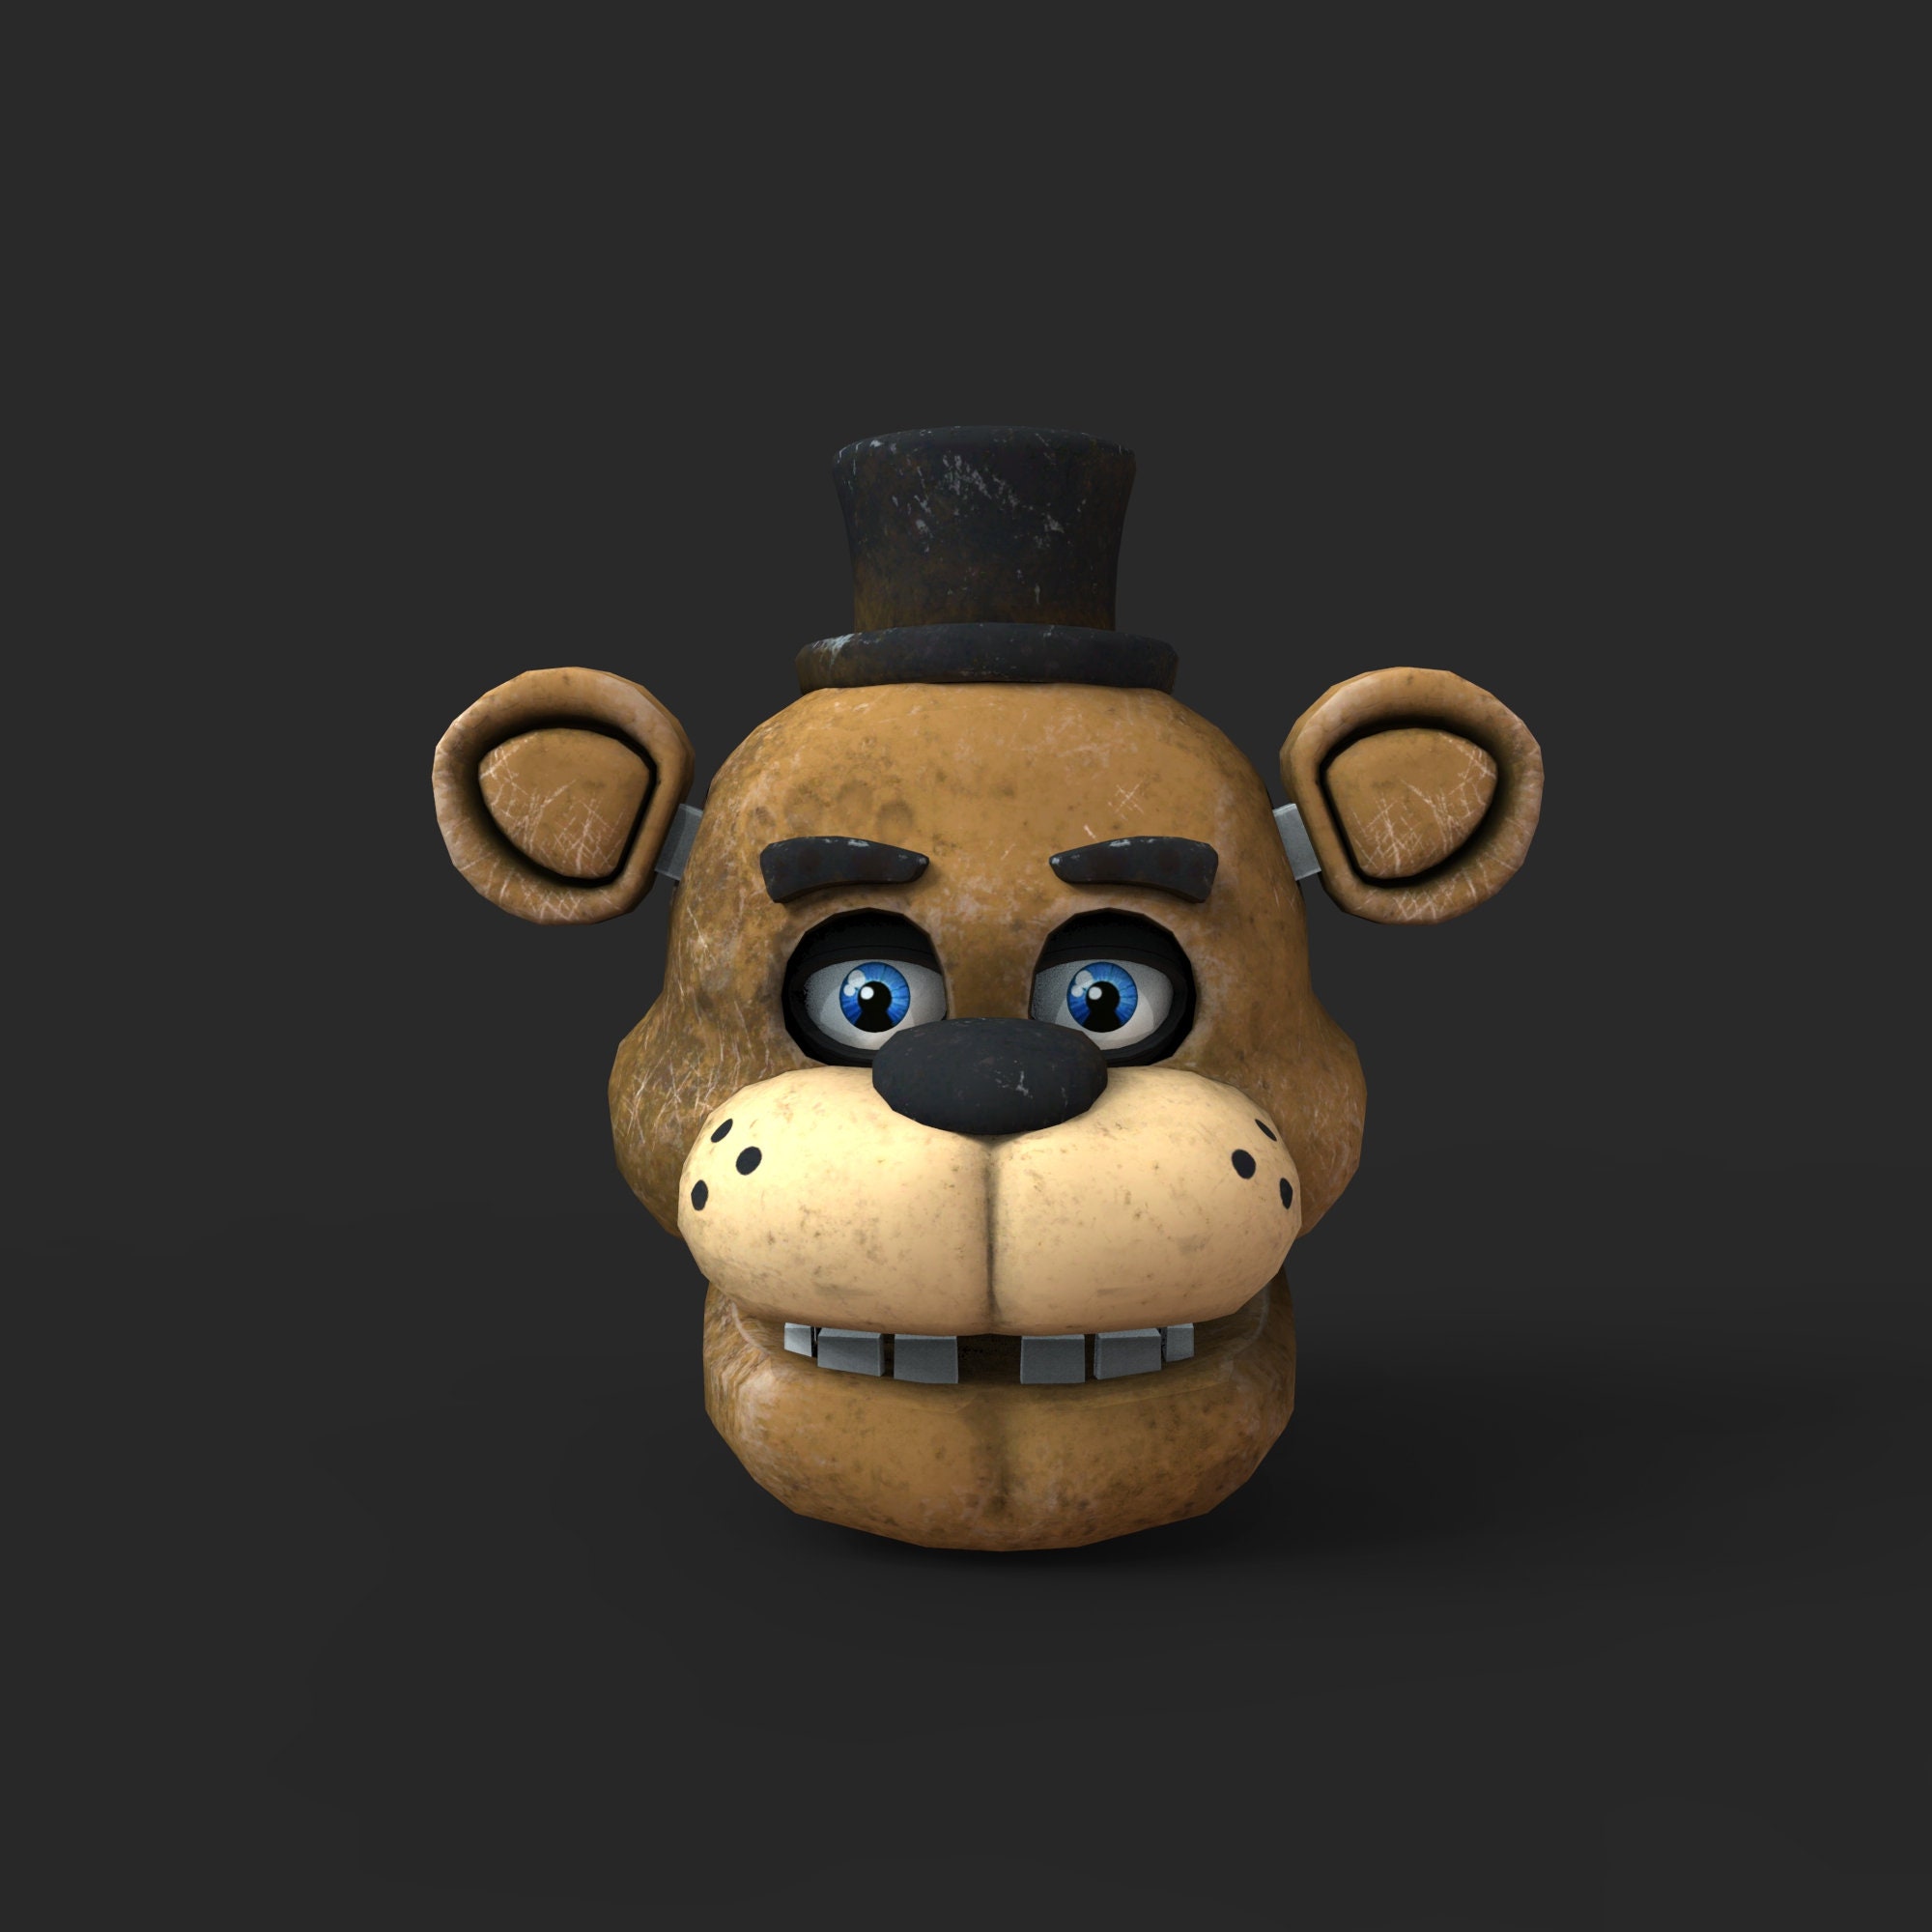 ASSISTIR Five Nights at Freddys Filme Completo - 3D model by